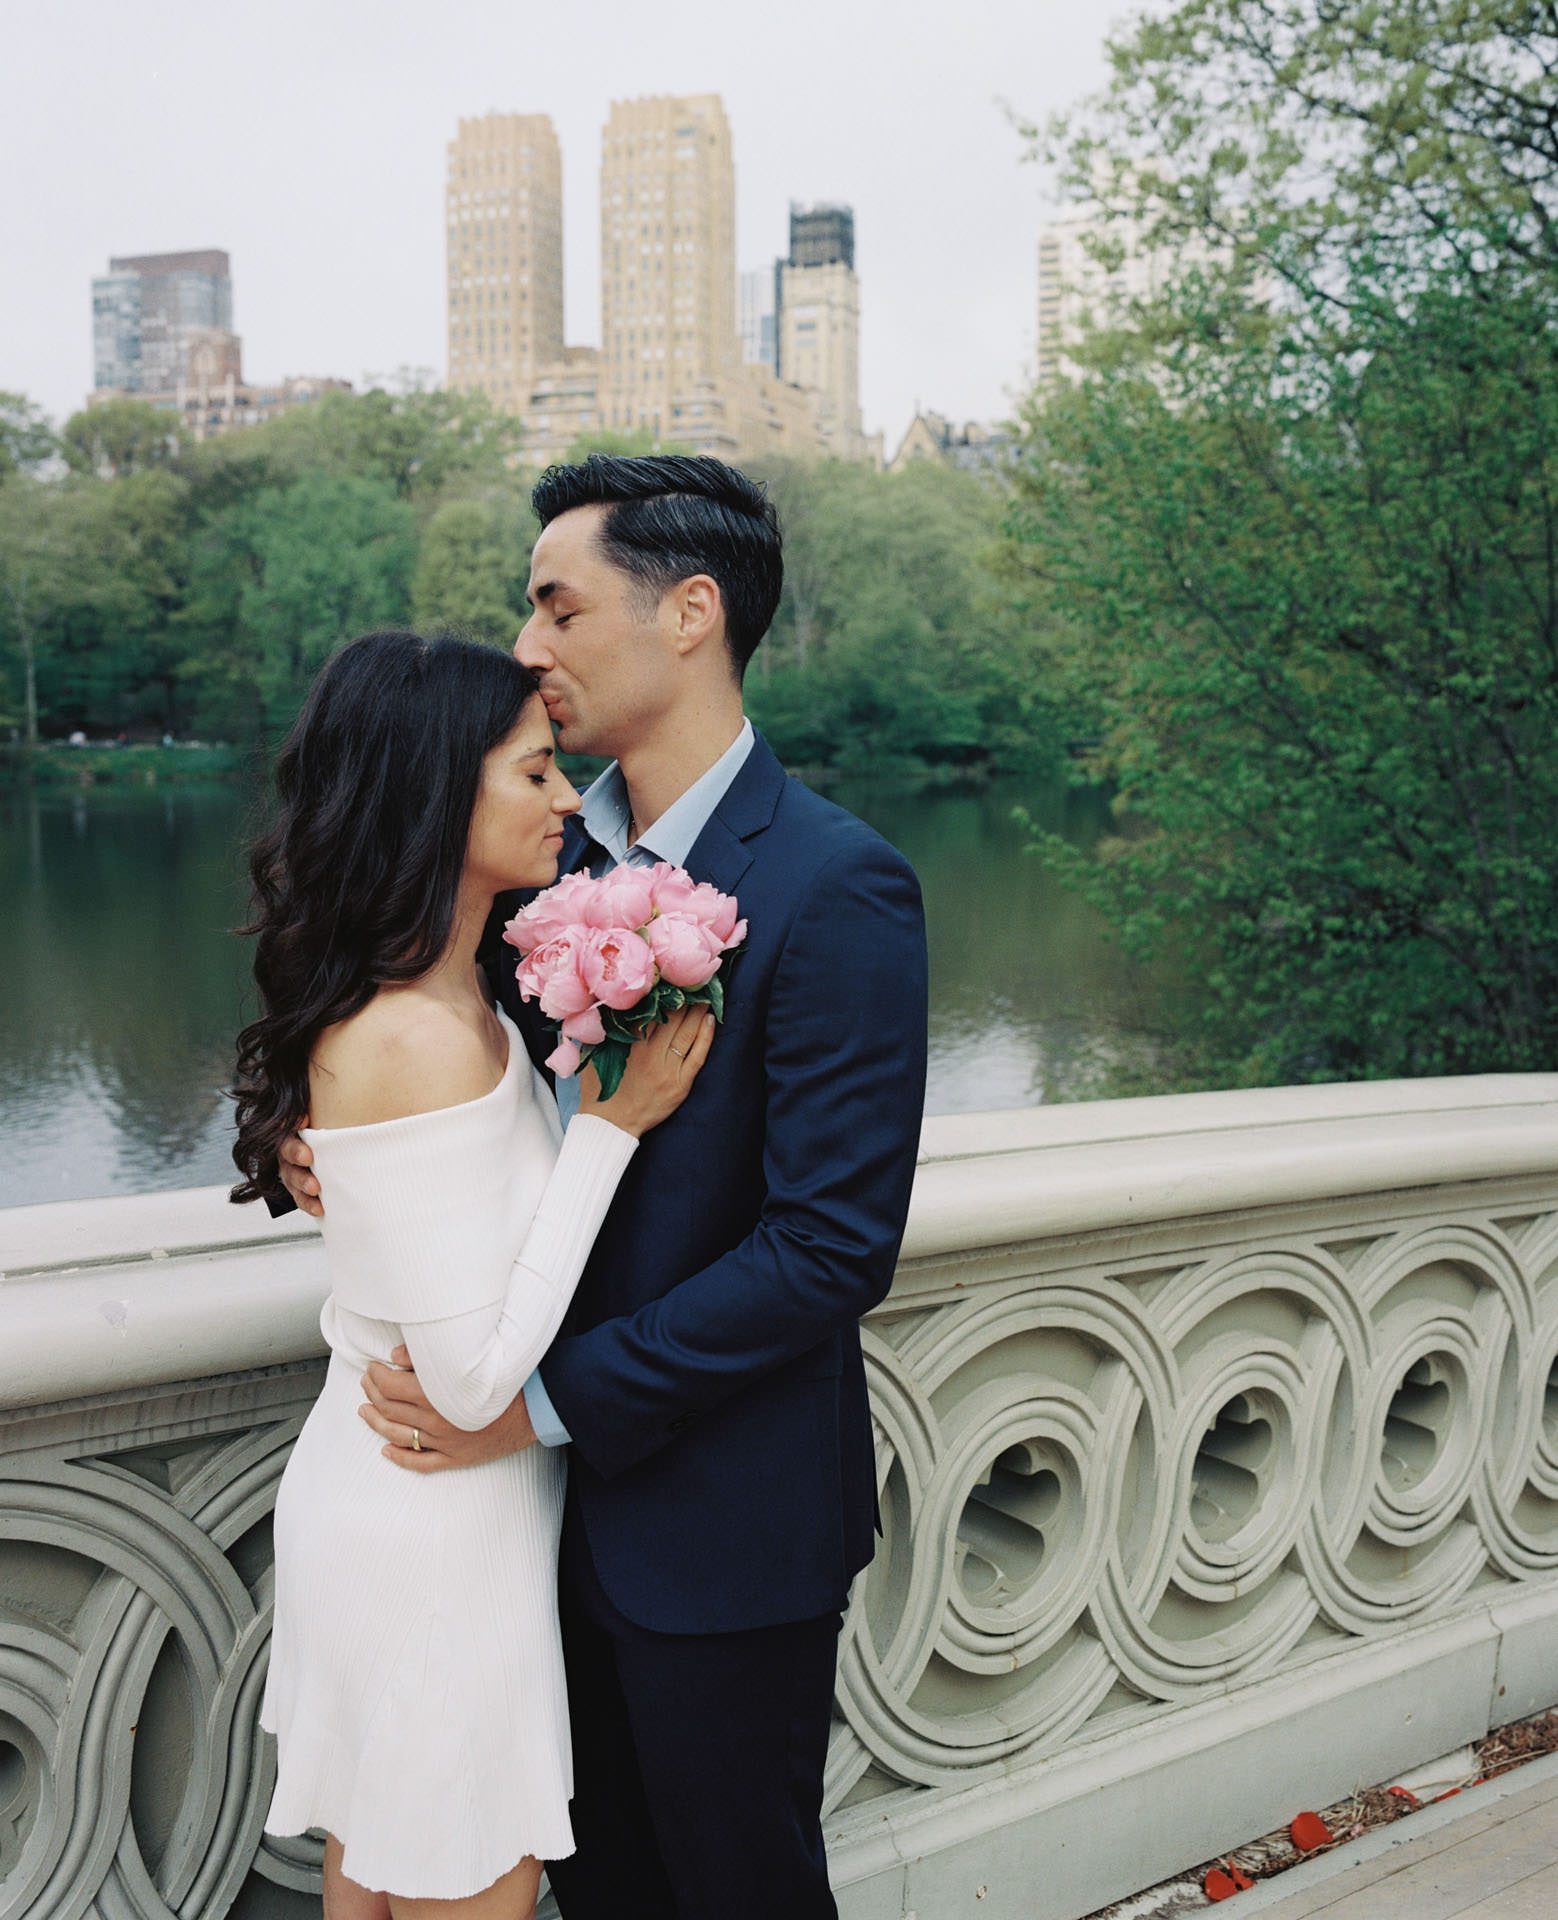 A couple sharing a kiss on the elegant Bow Bridge, with the serene lake and lush greenery in the background.